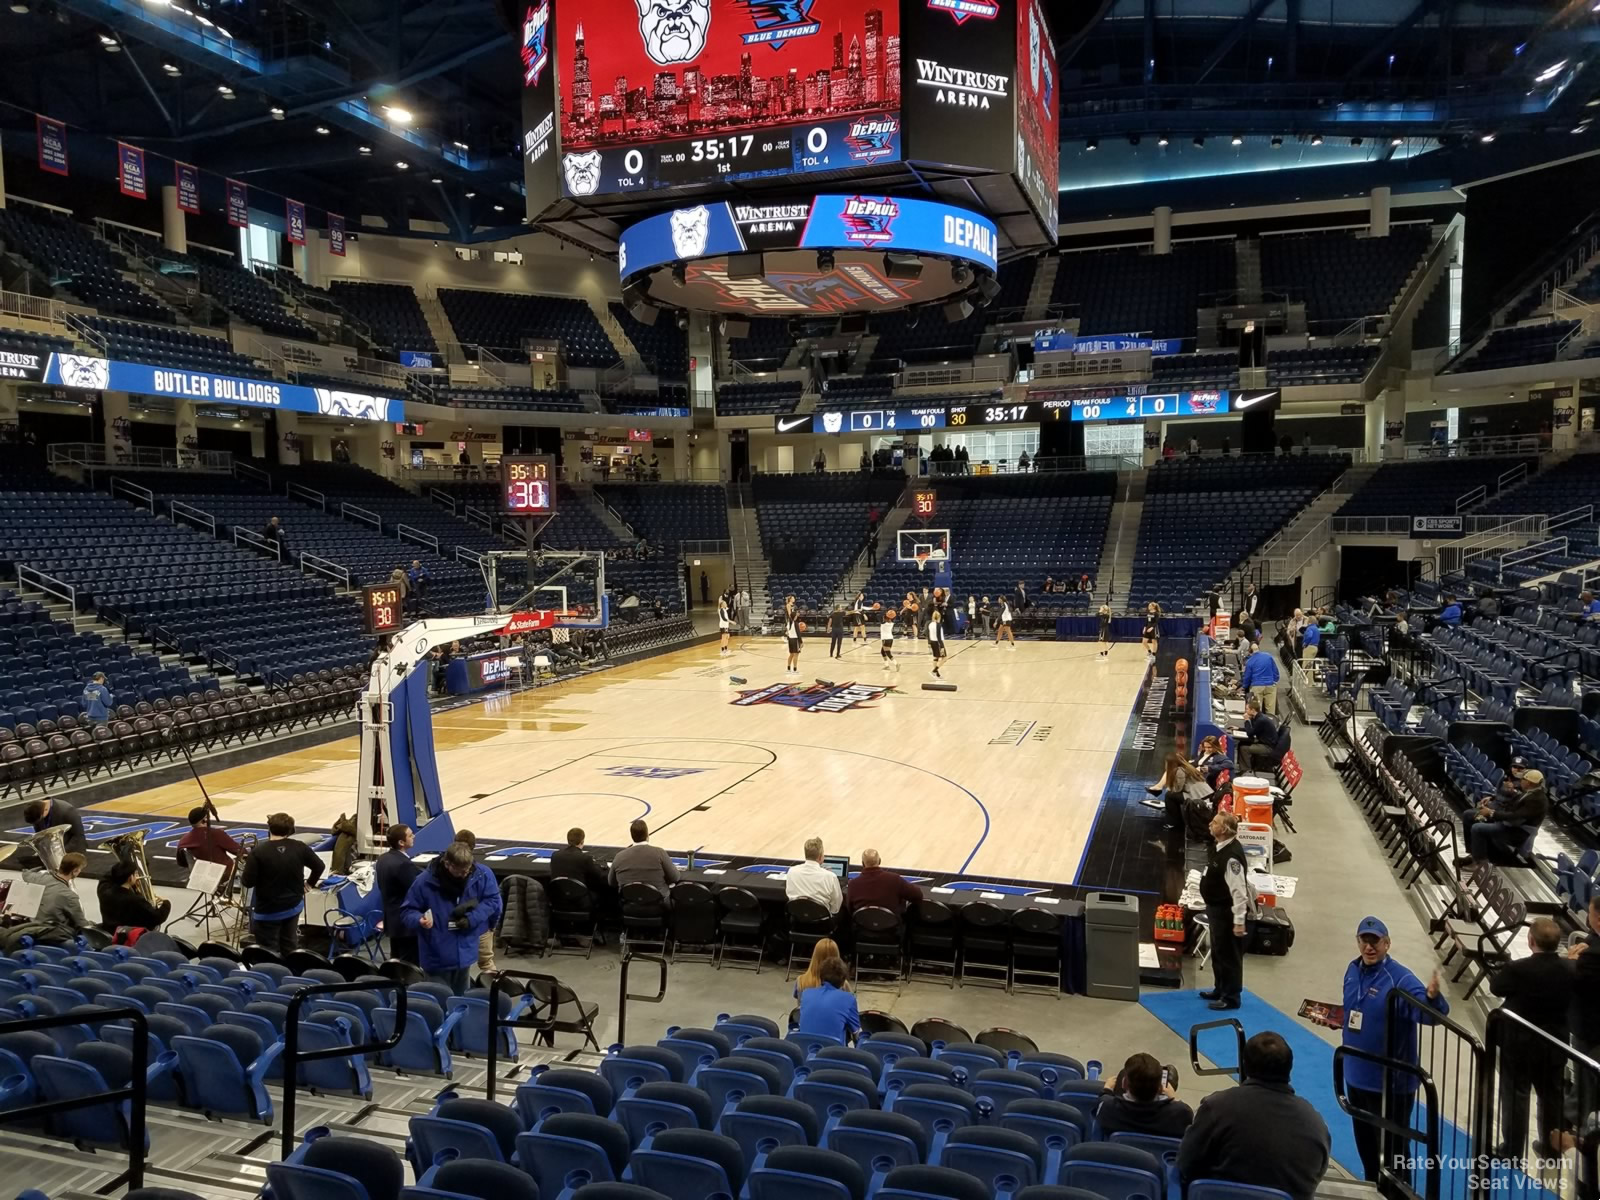 Section 115 at Wintrust Arena DePaul Basketball